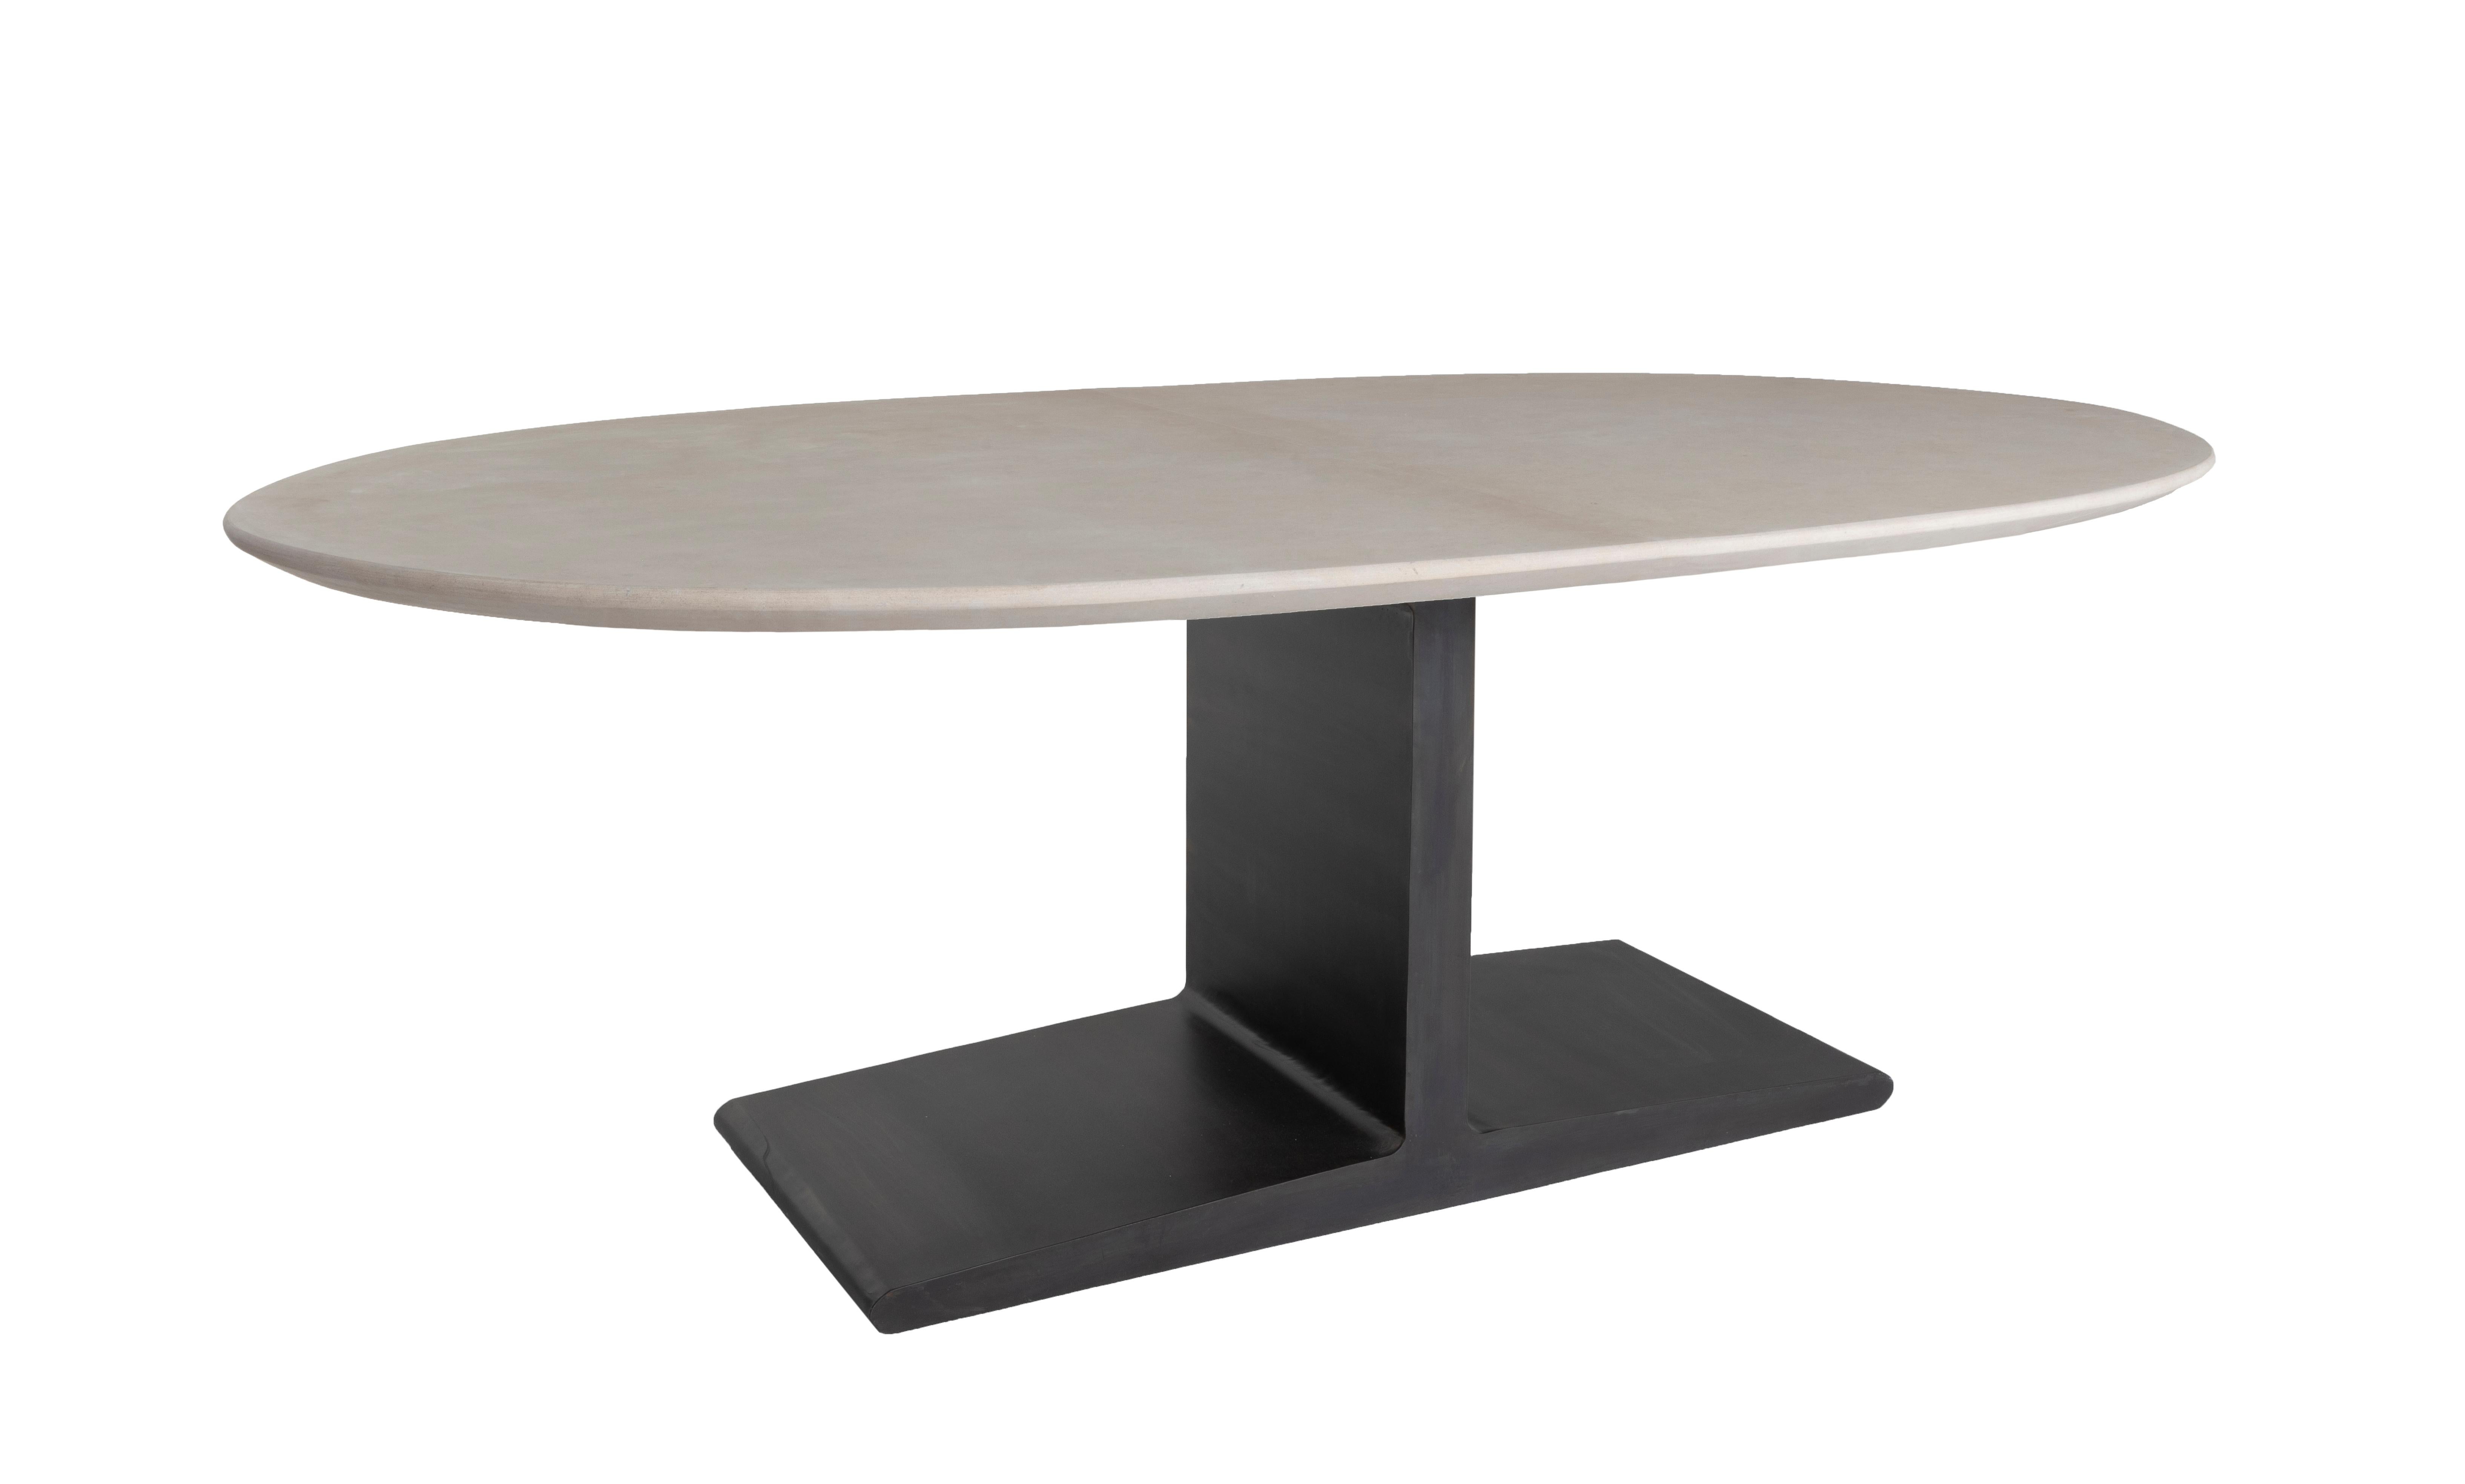 Oval limestone top dining table on steel I beam base.

Designed by Brendan Bass for the Vision and Design Collection, by using high quality materials and textures. All materials are sourced from local vendors throughout the state of Texas. The